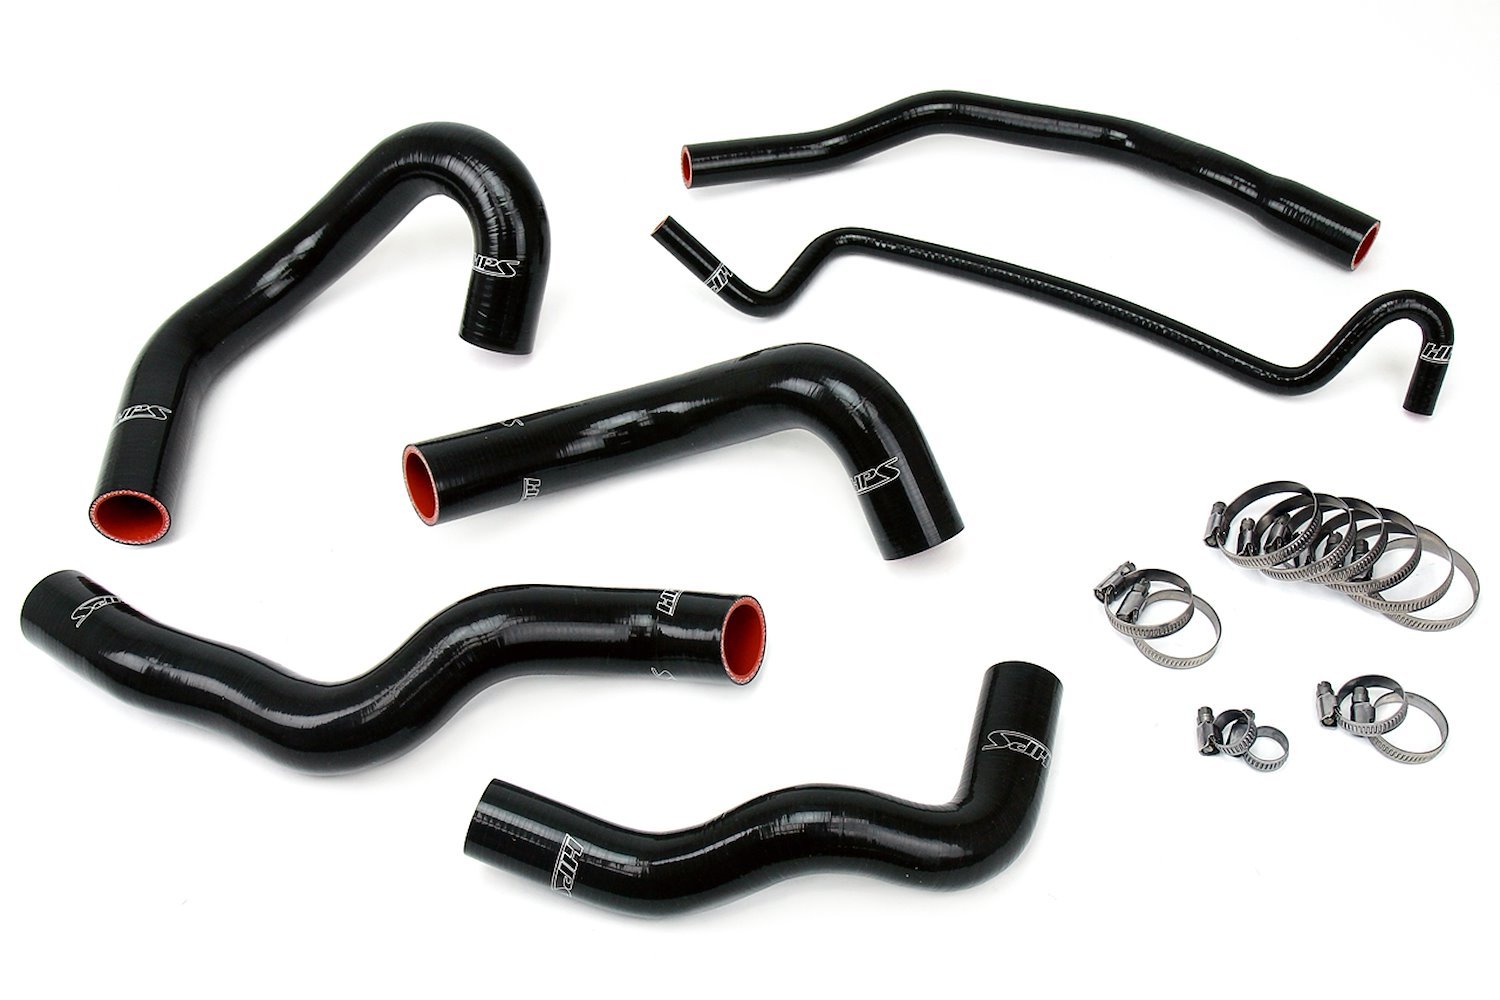 57-1013-BLK Radiator Hose Kit, High-Temp 3-Ply Reinforced Silicone, Replace OEM Rubber Radiator Coolant Hoses